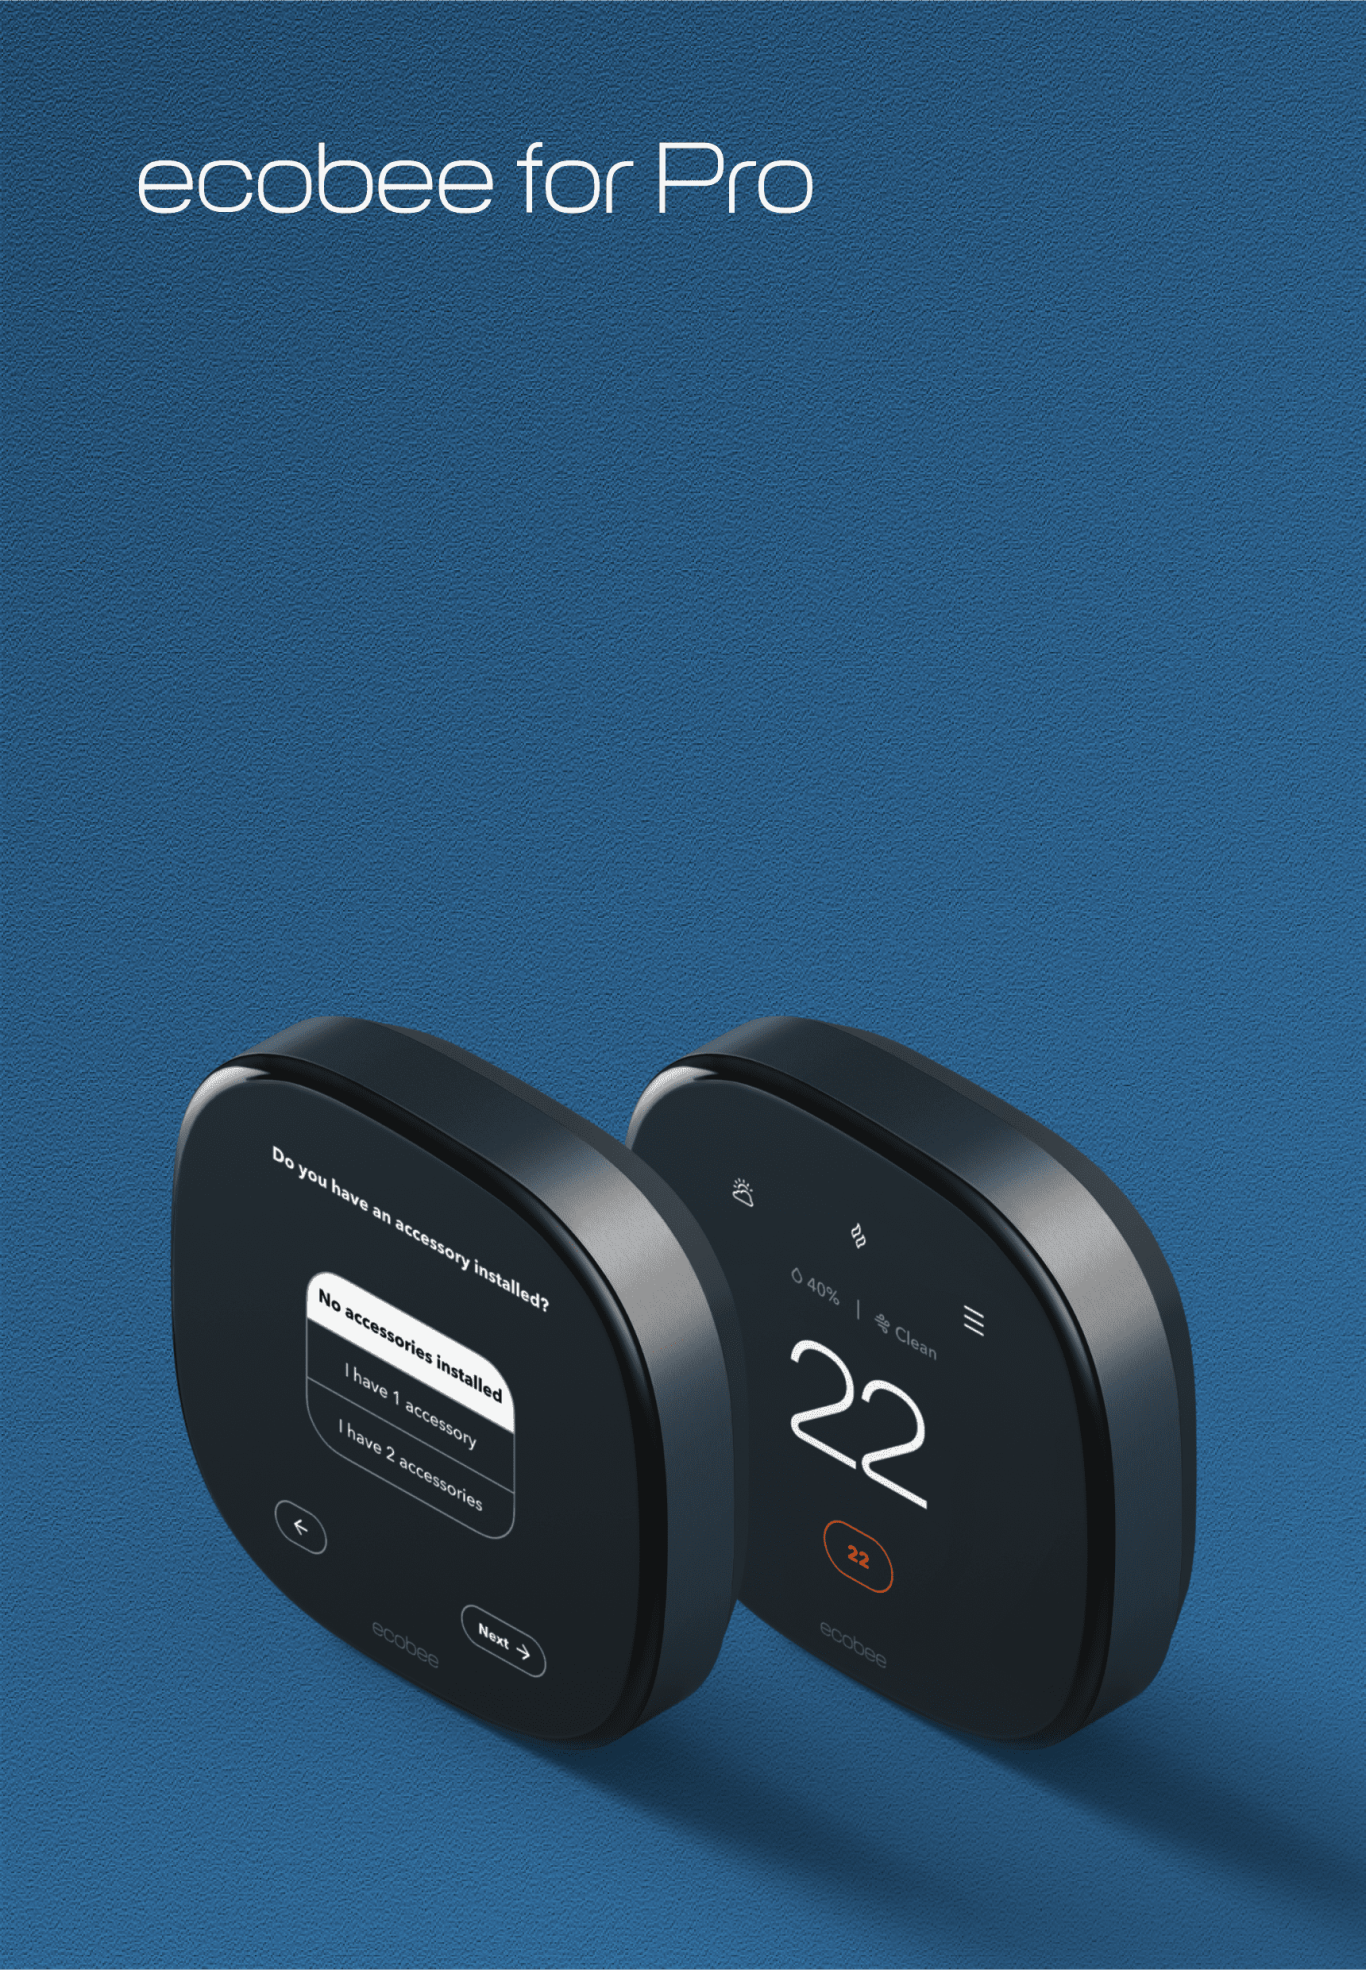 ecobee thermostats on a blue background with "ecobee for pro" in the corner